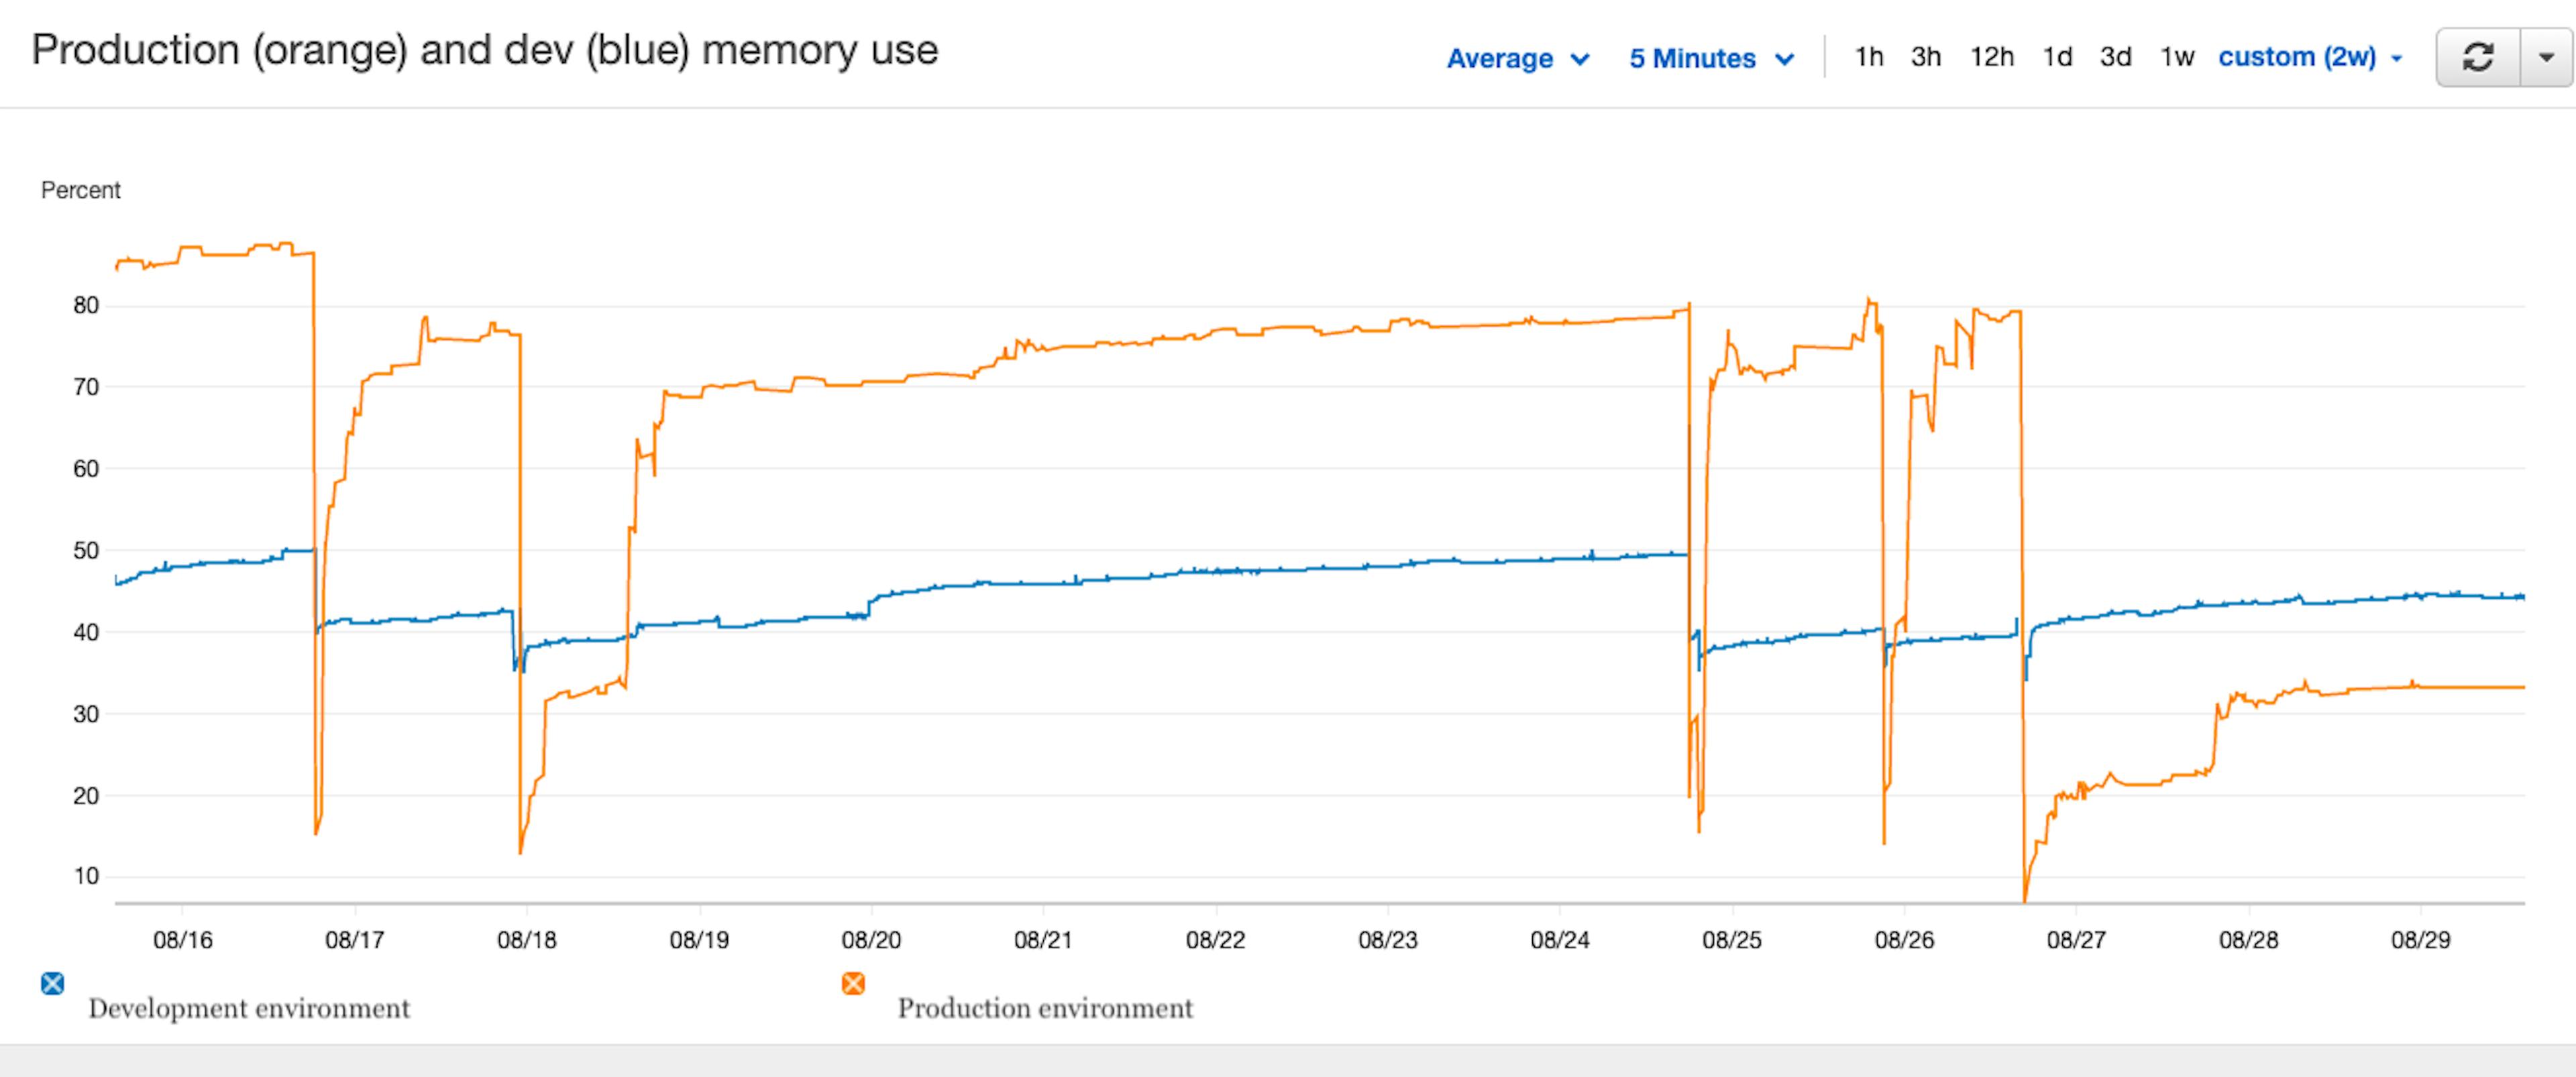 Memory use of our development (blue) and production (orange) environments before jemalloc